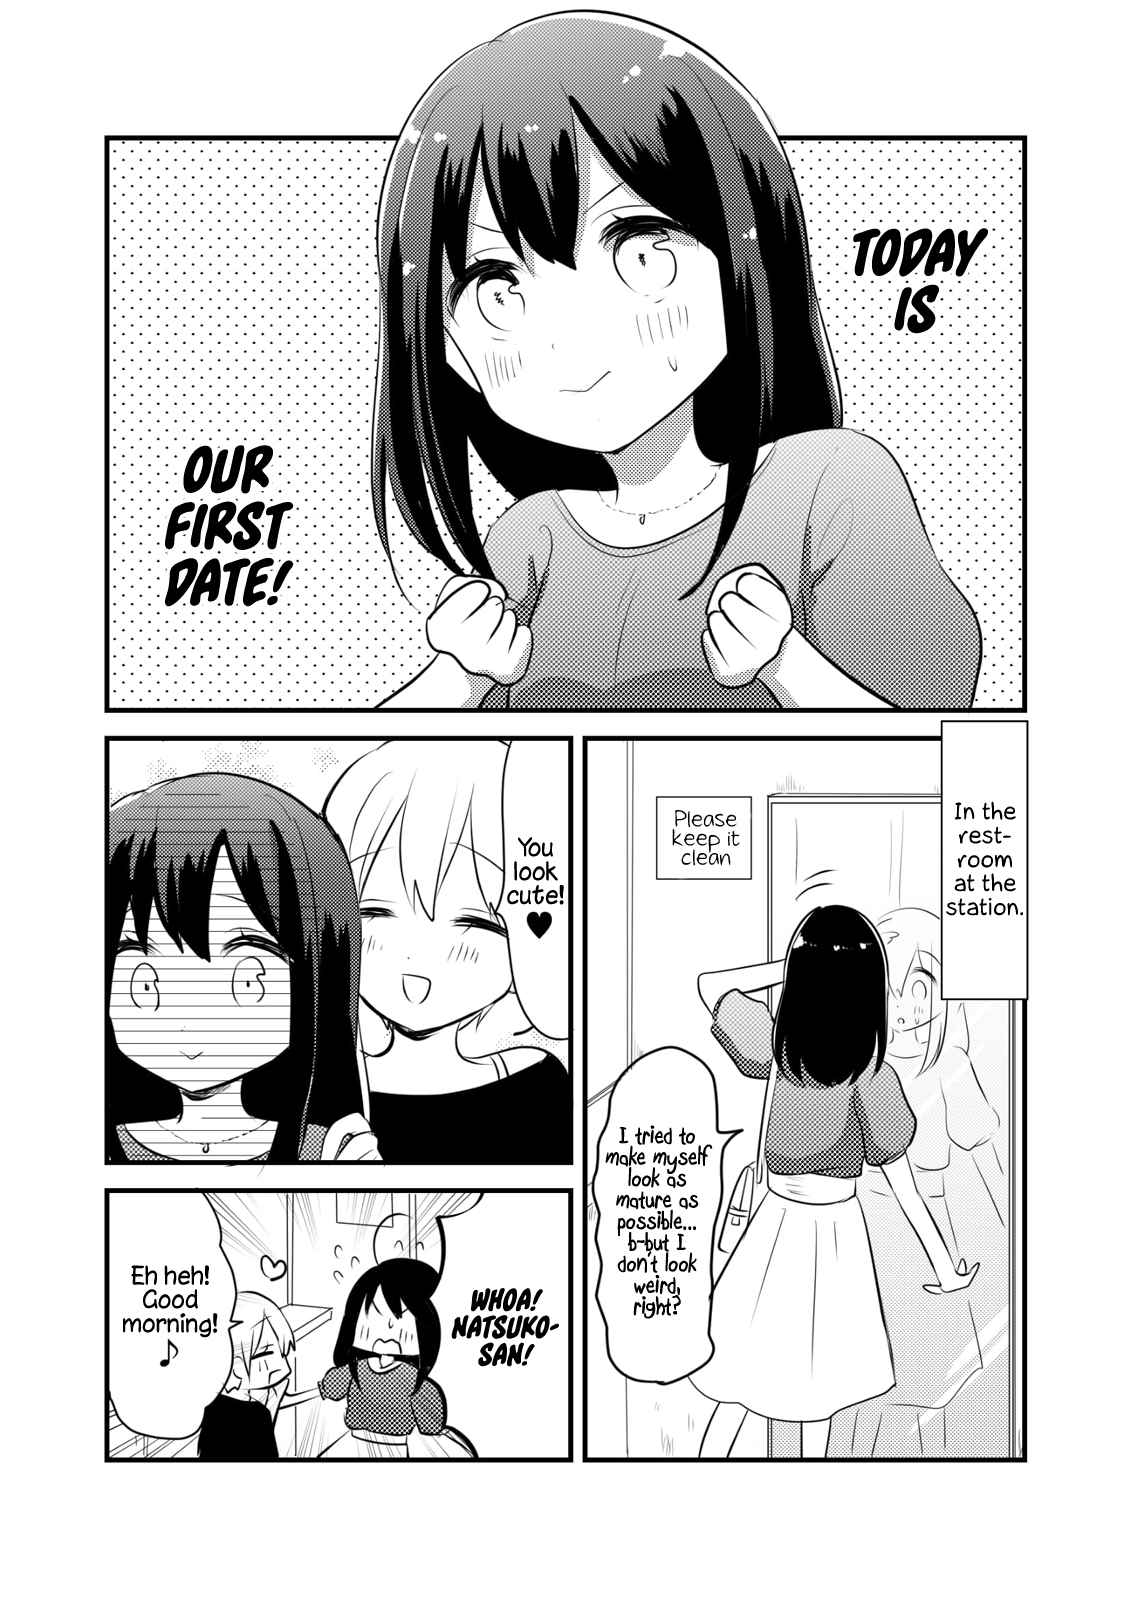 About a College Girl Who Gets Picked Up at a Mixer by an Older Girl Ch. 7.5